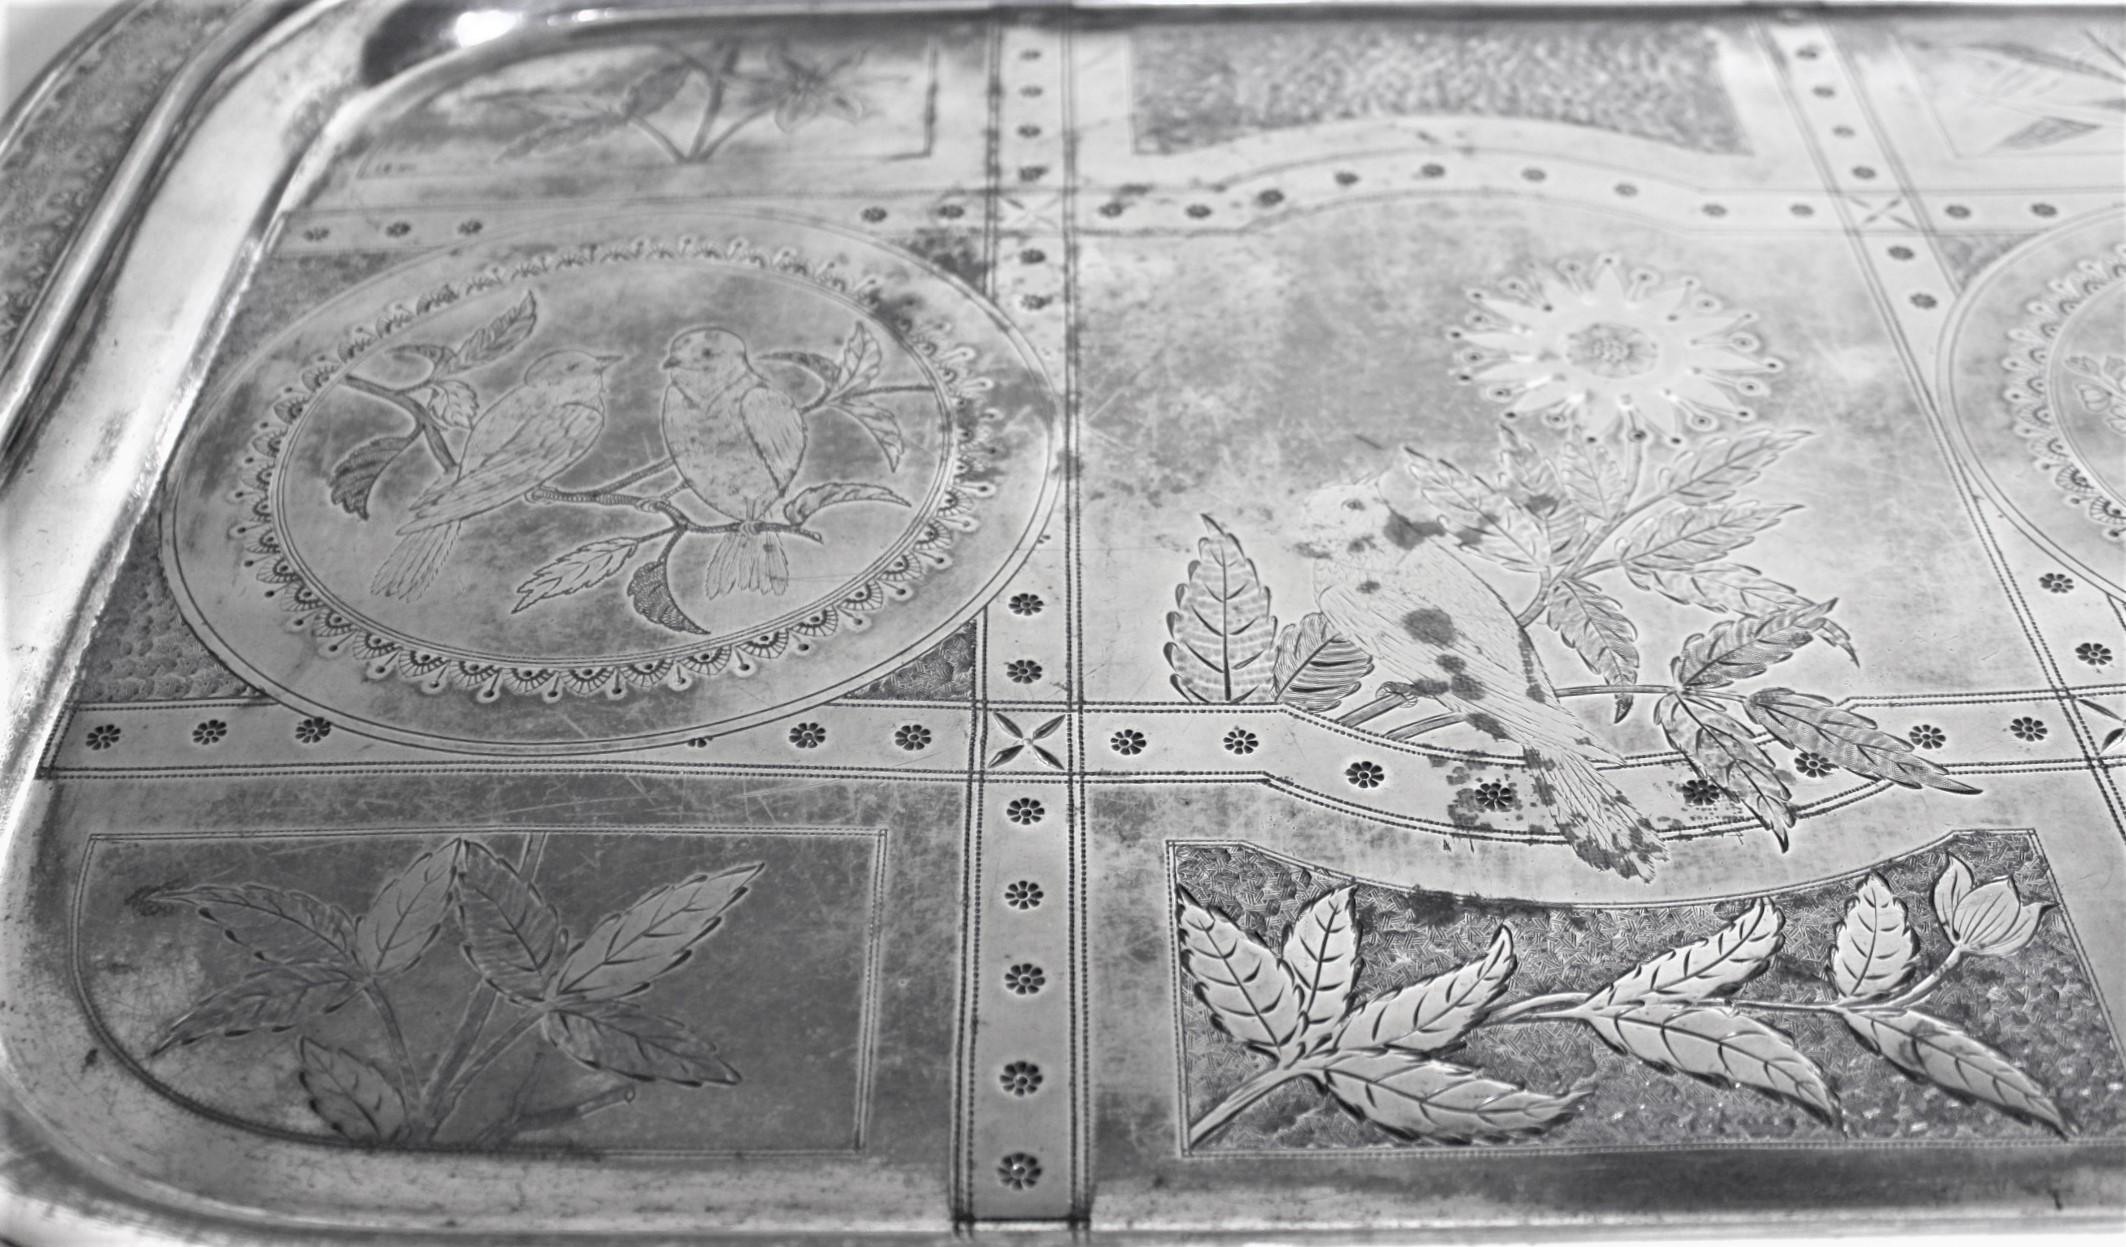 Lg. Aesthetic Movement Silver Plated Serving Tray with Engraved Flowers & Birds For Sale 2